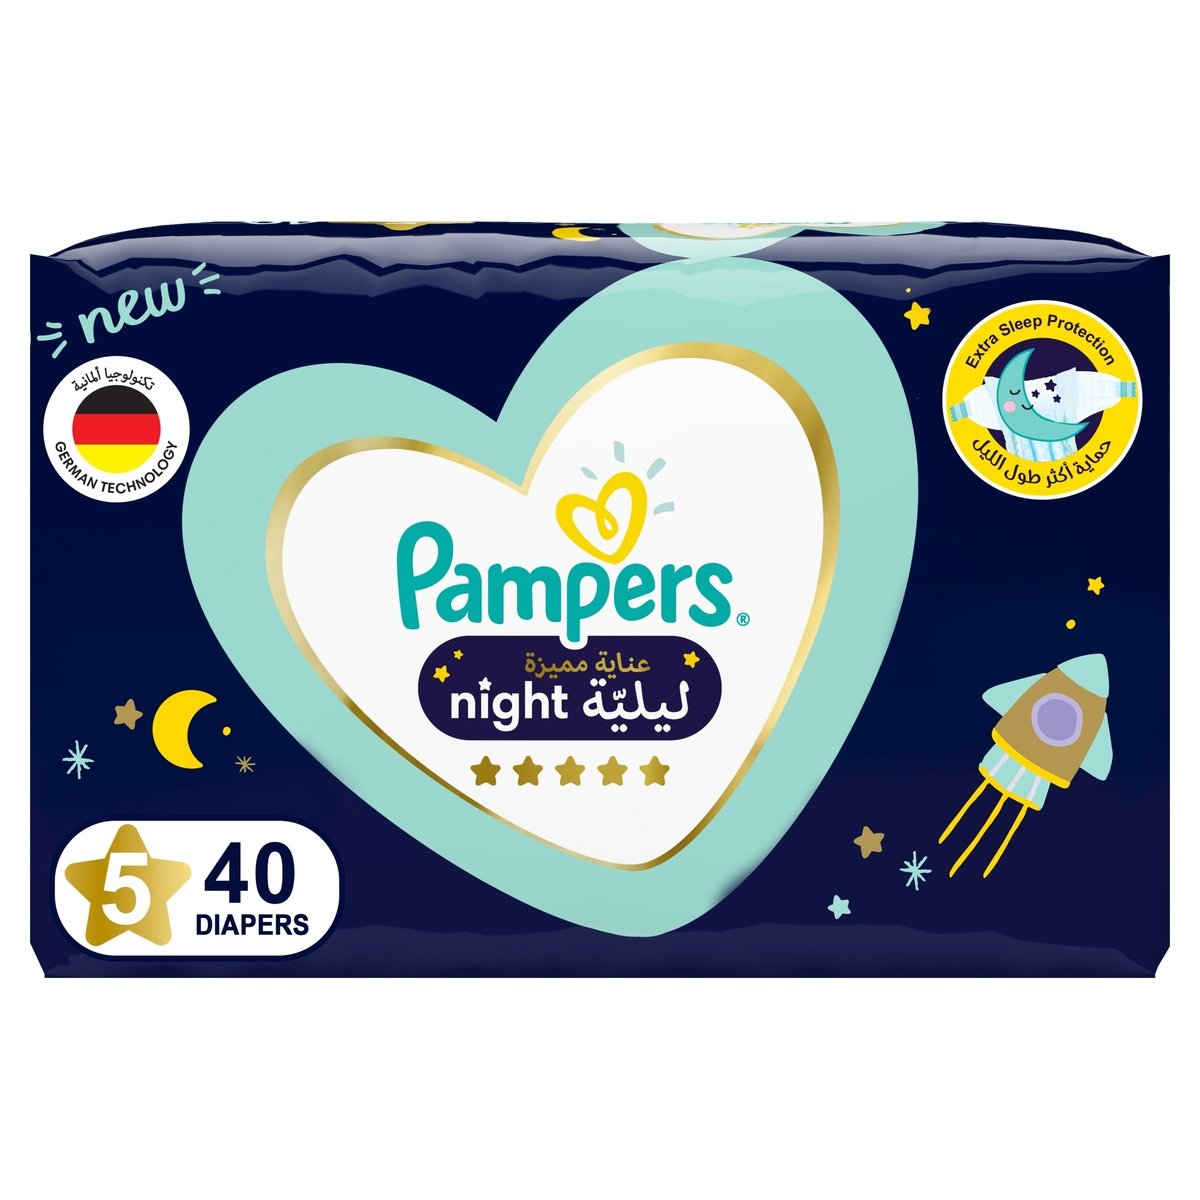 Pampers Premium Care Night Diapers Size 5 12-17kg 40pcs